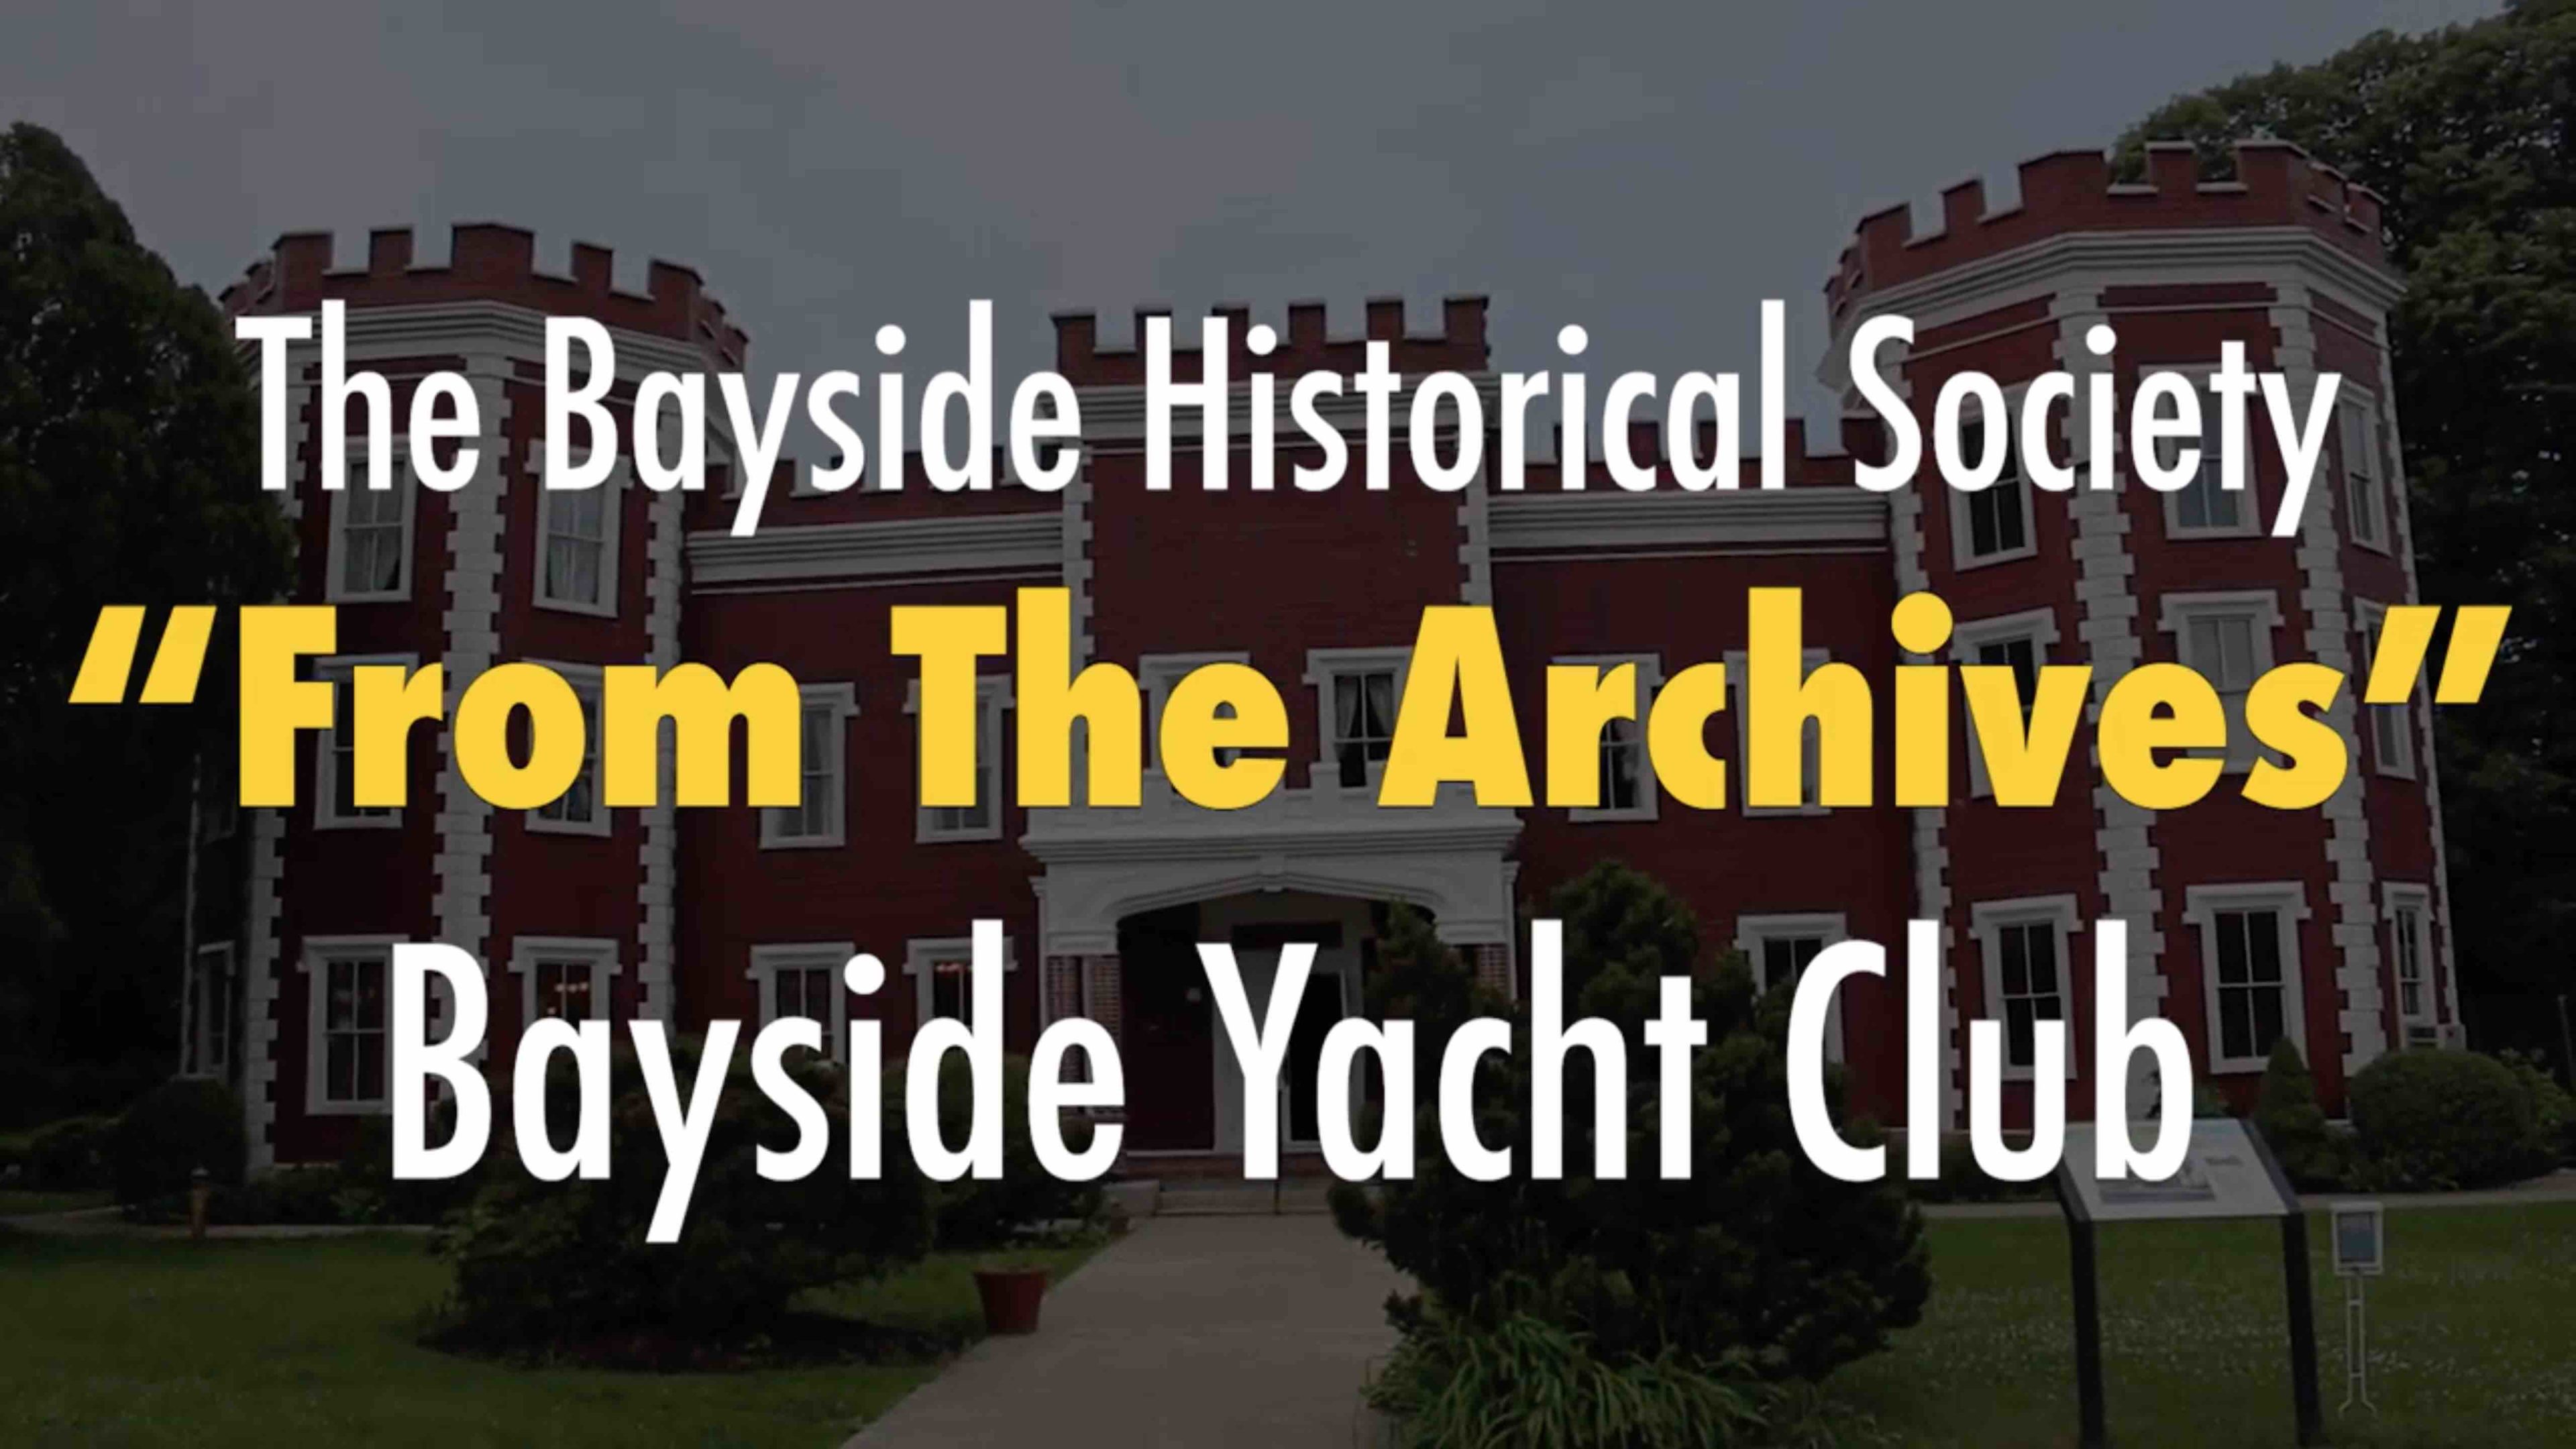 Bayside Historical Society – “From the Archives: Bayside Yacht Club”